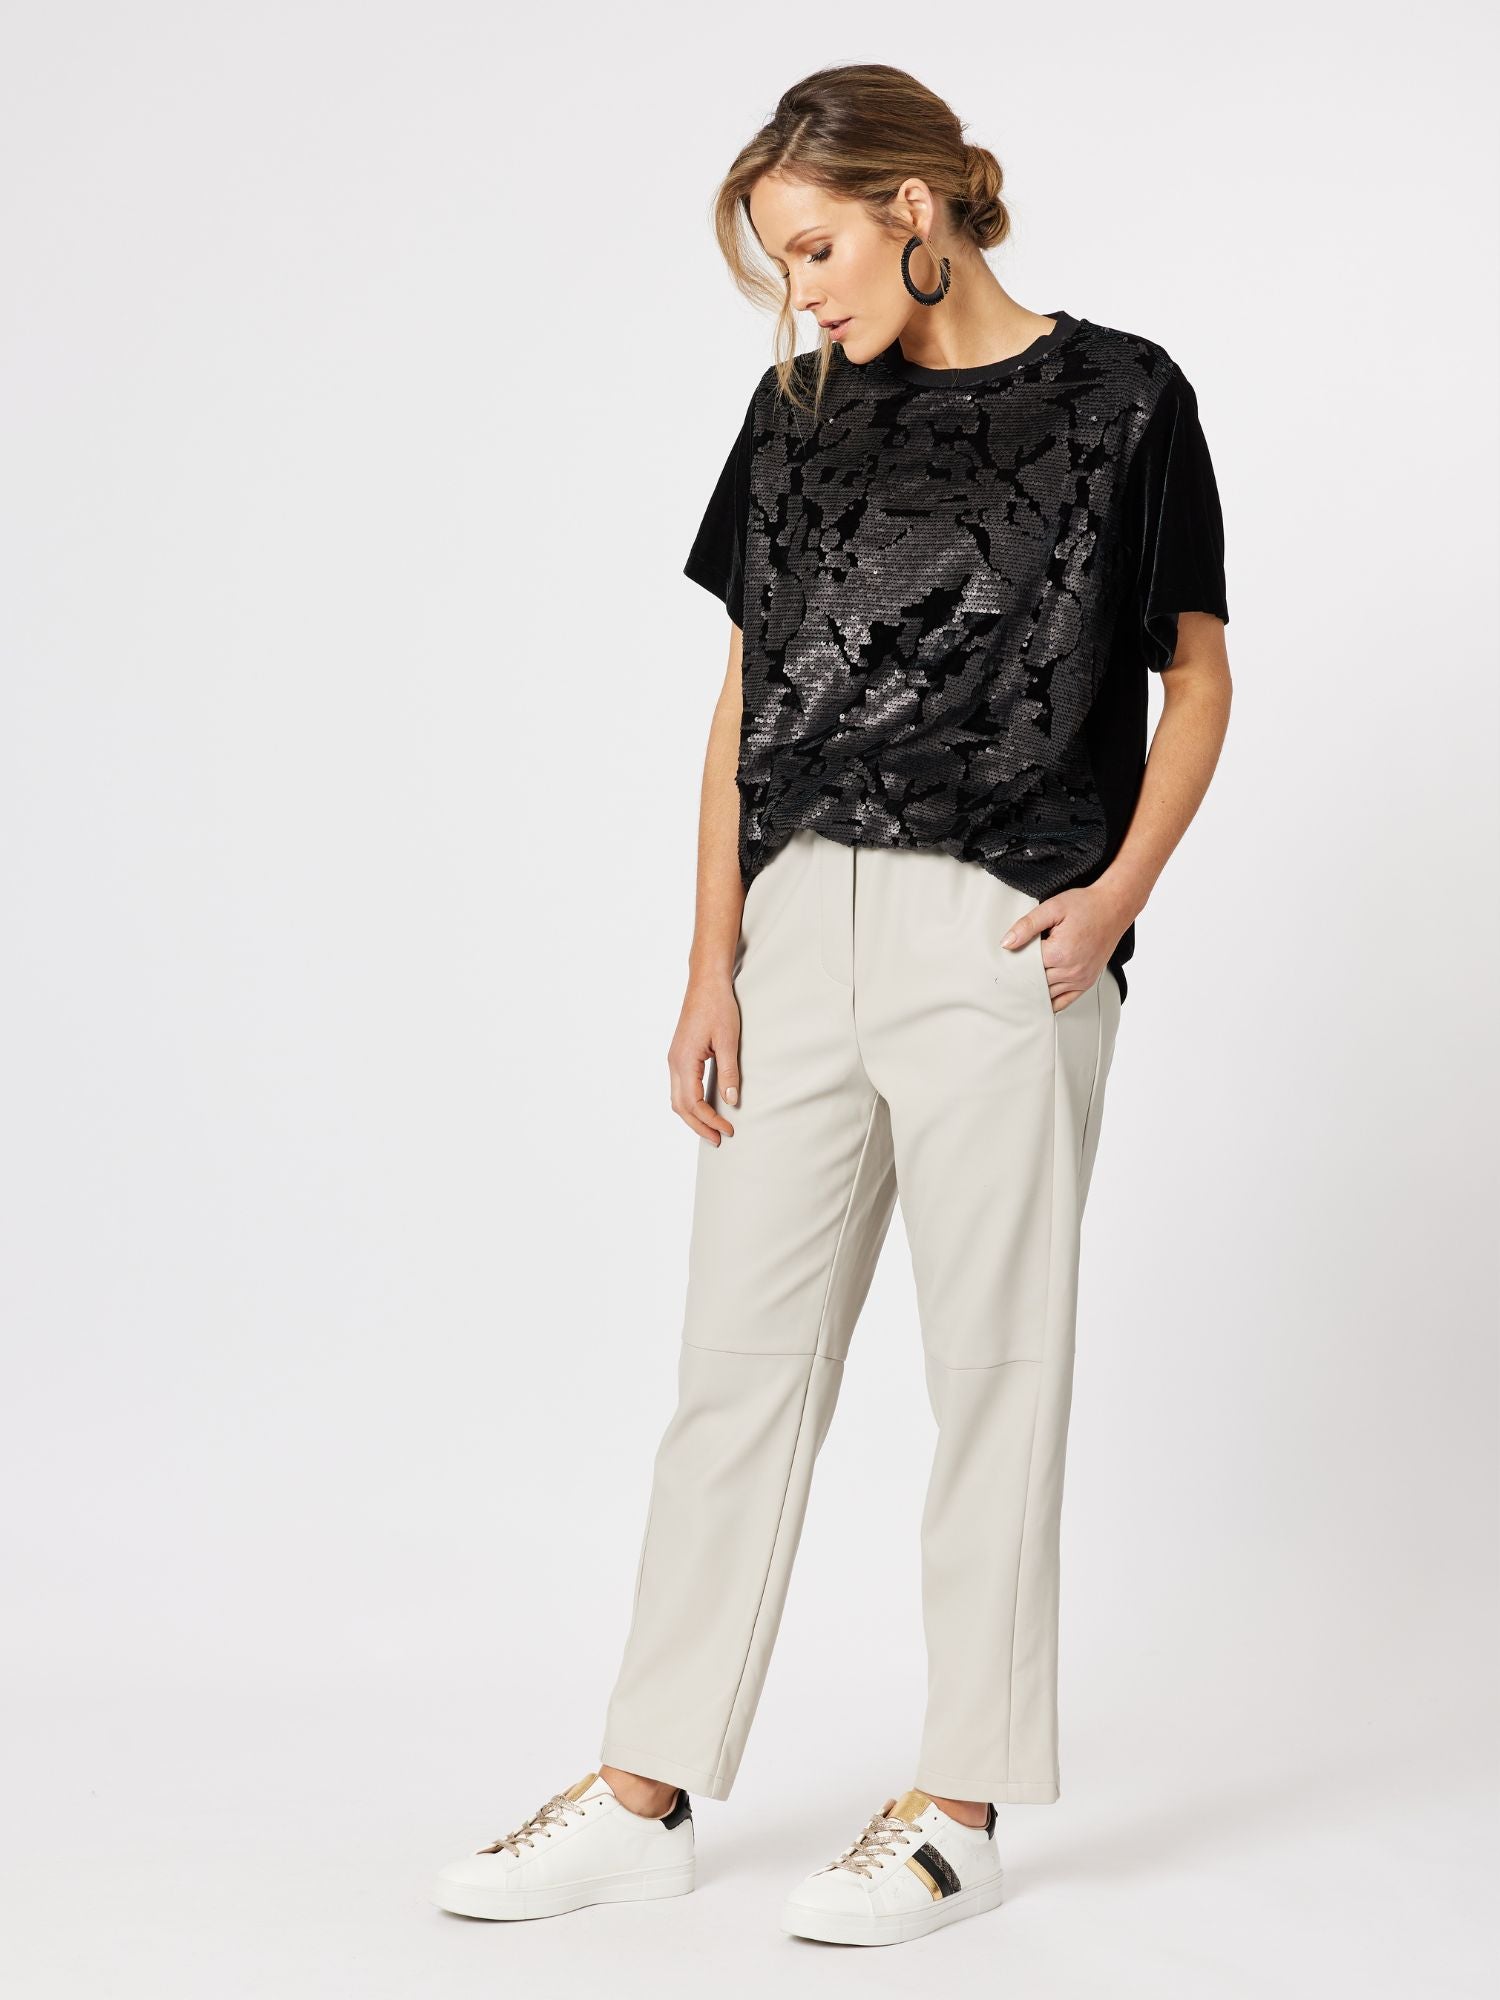 Vegan Leather Pull On Pant - Putty